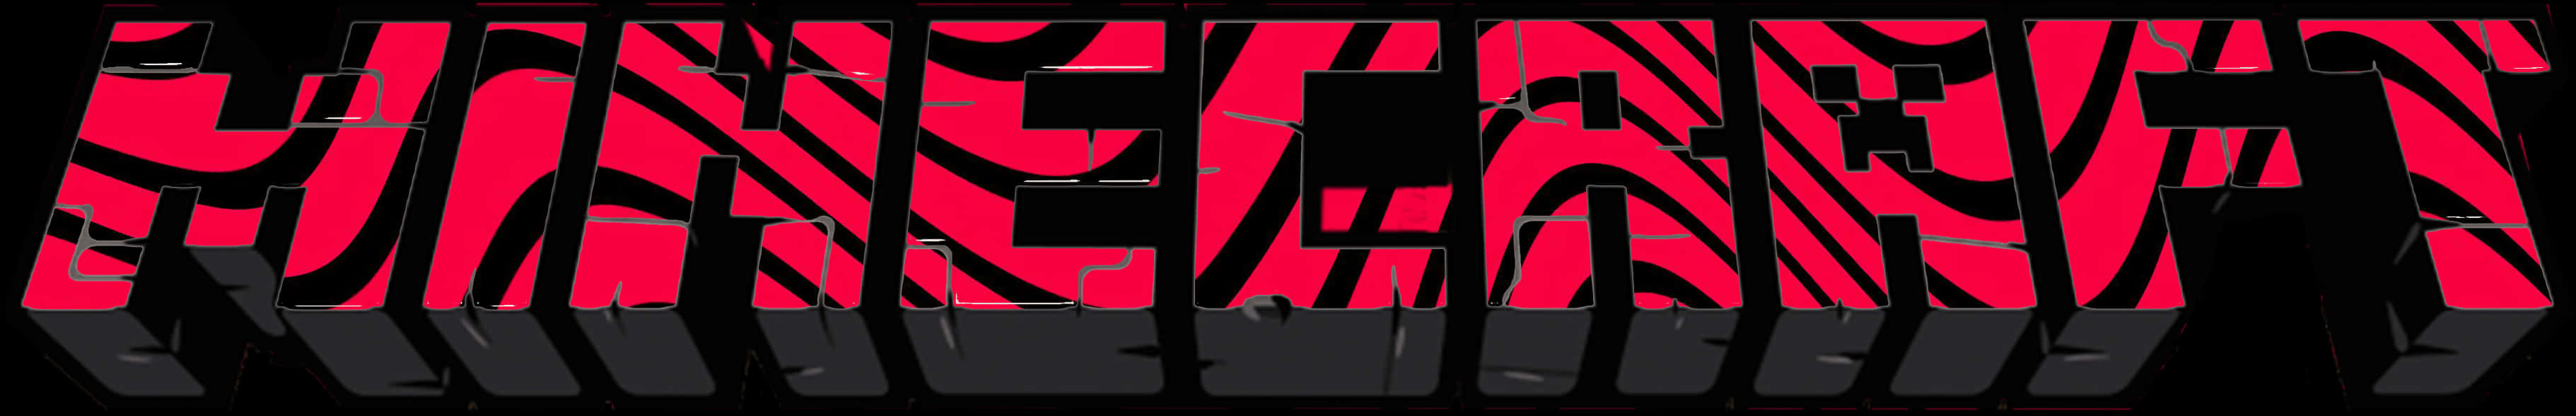 Minecraft Logo Distorted Red Black PNG image